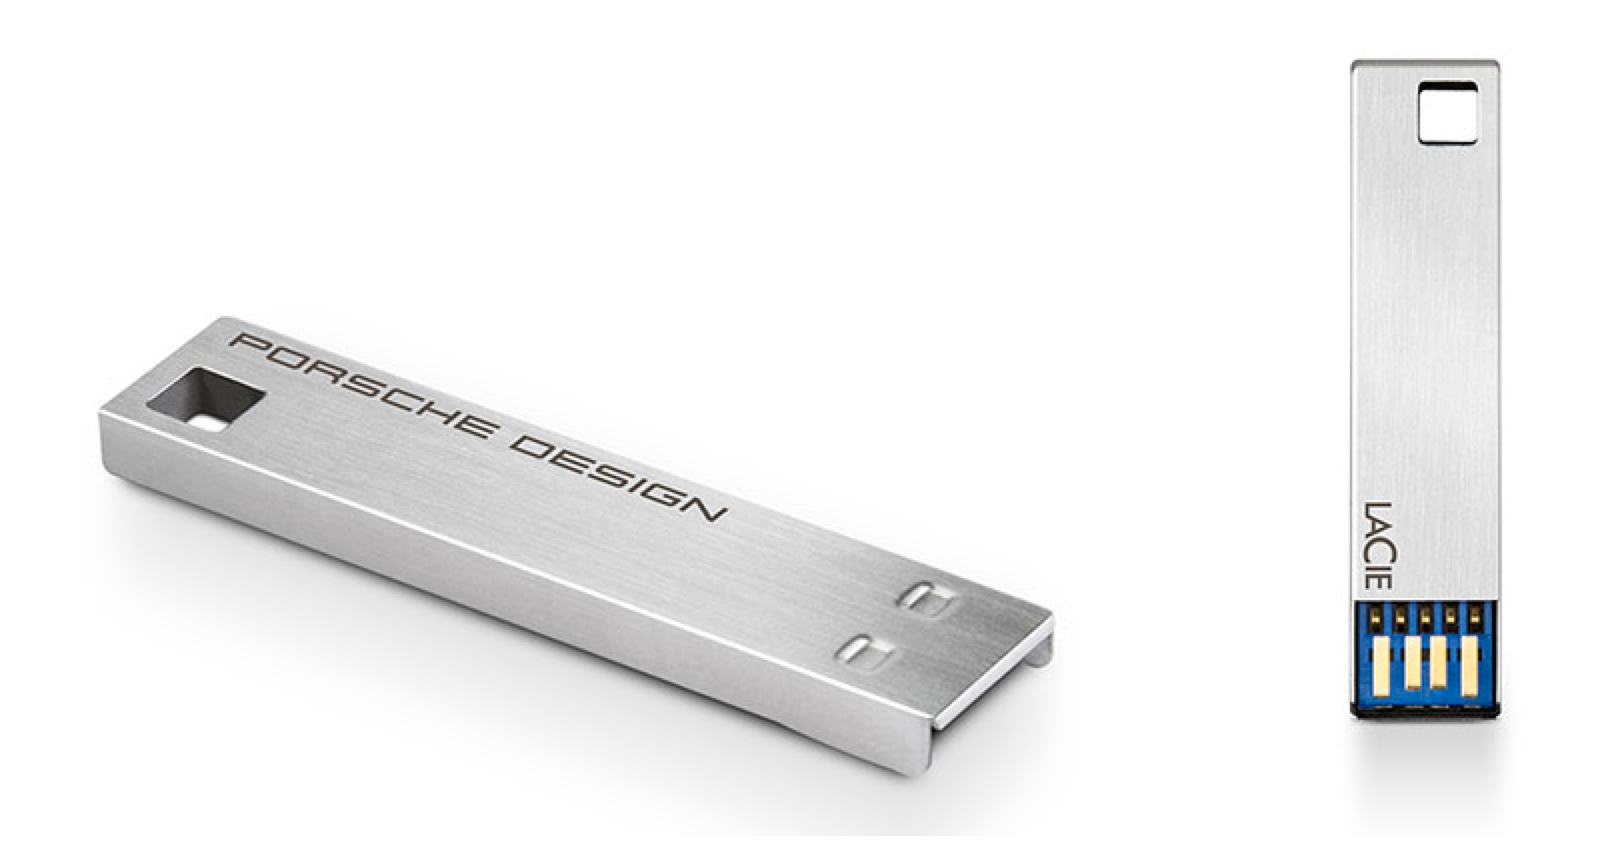 you fancy huh lacie unveils porsche designed usb key with up to 32gb of storage image 1